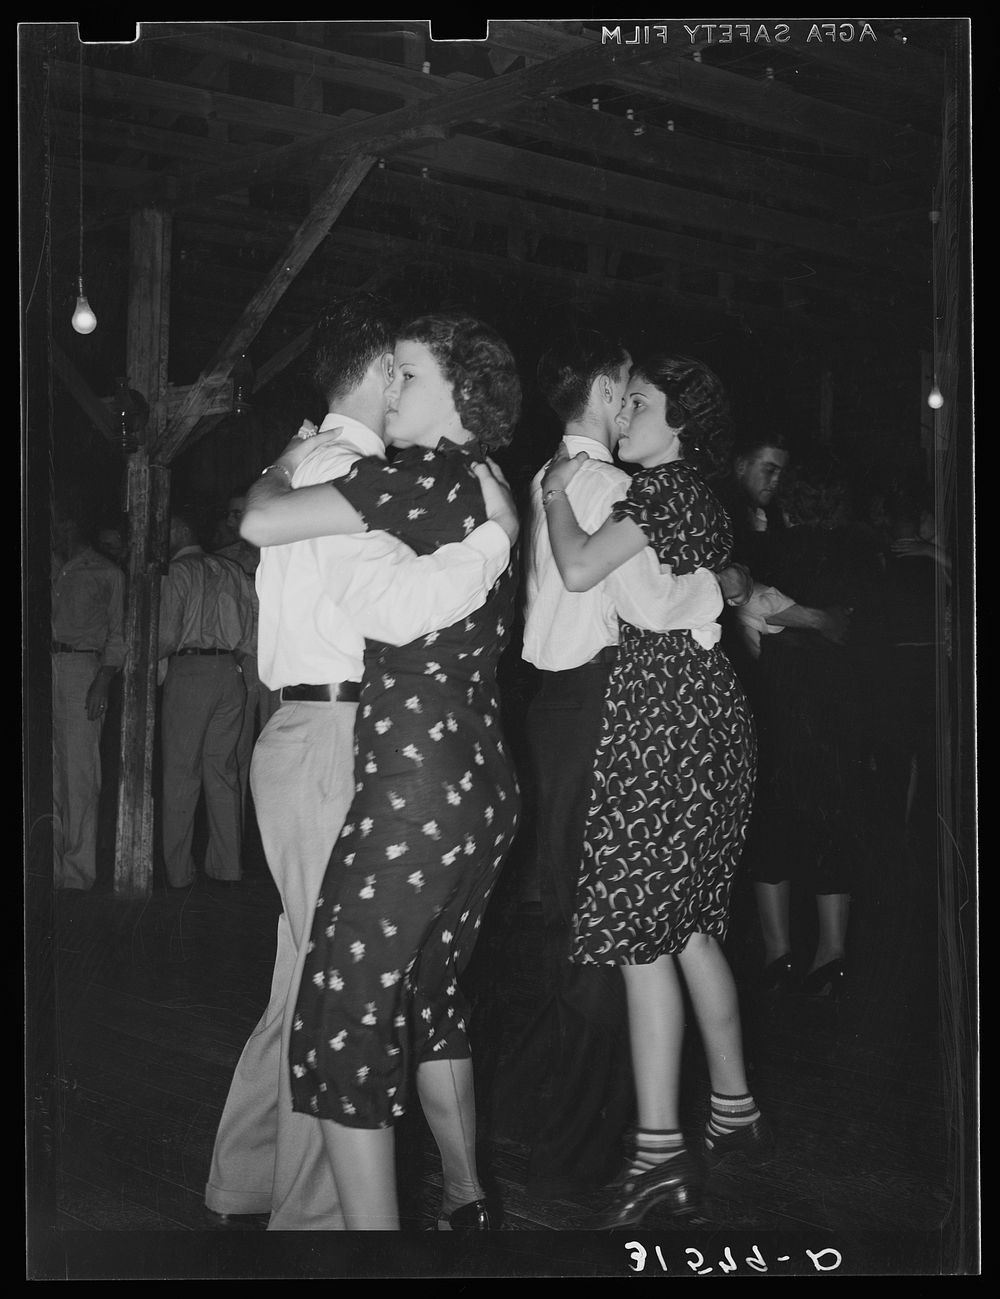 [Untitled photo, possibly related to: Fais-do-do dance near Crowley, Louisiana (see 31580-D for more information)] by…